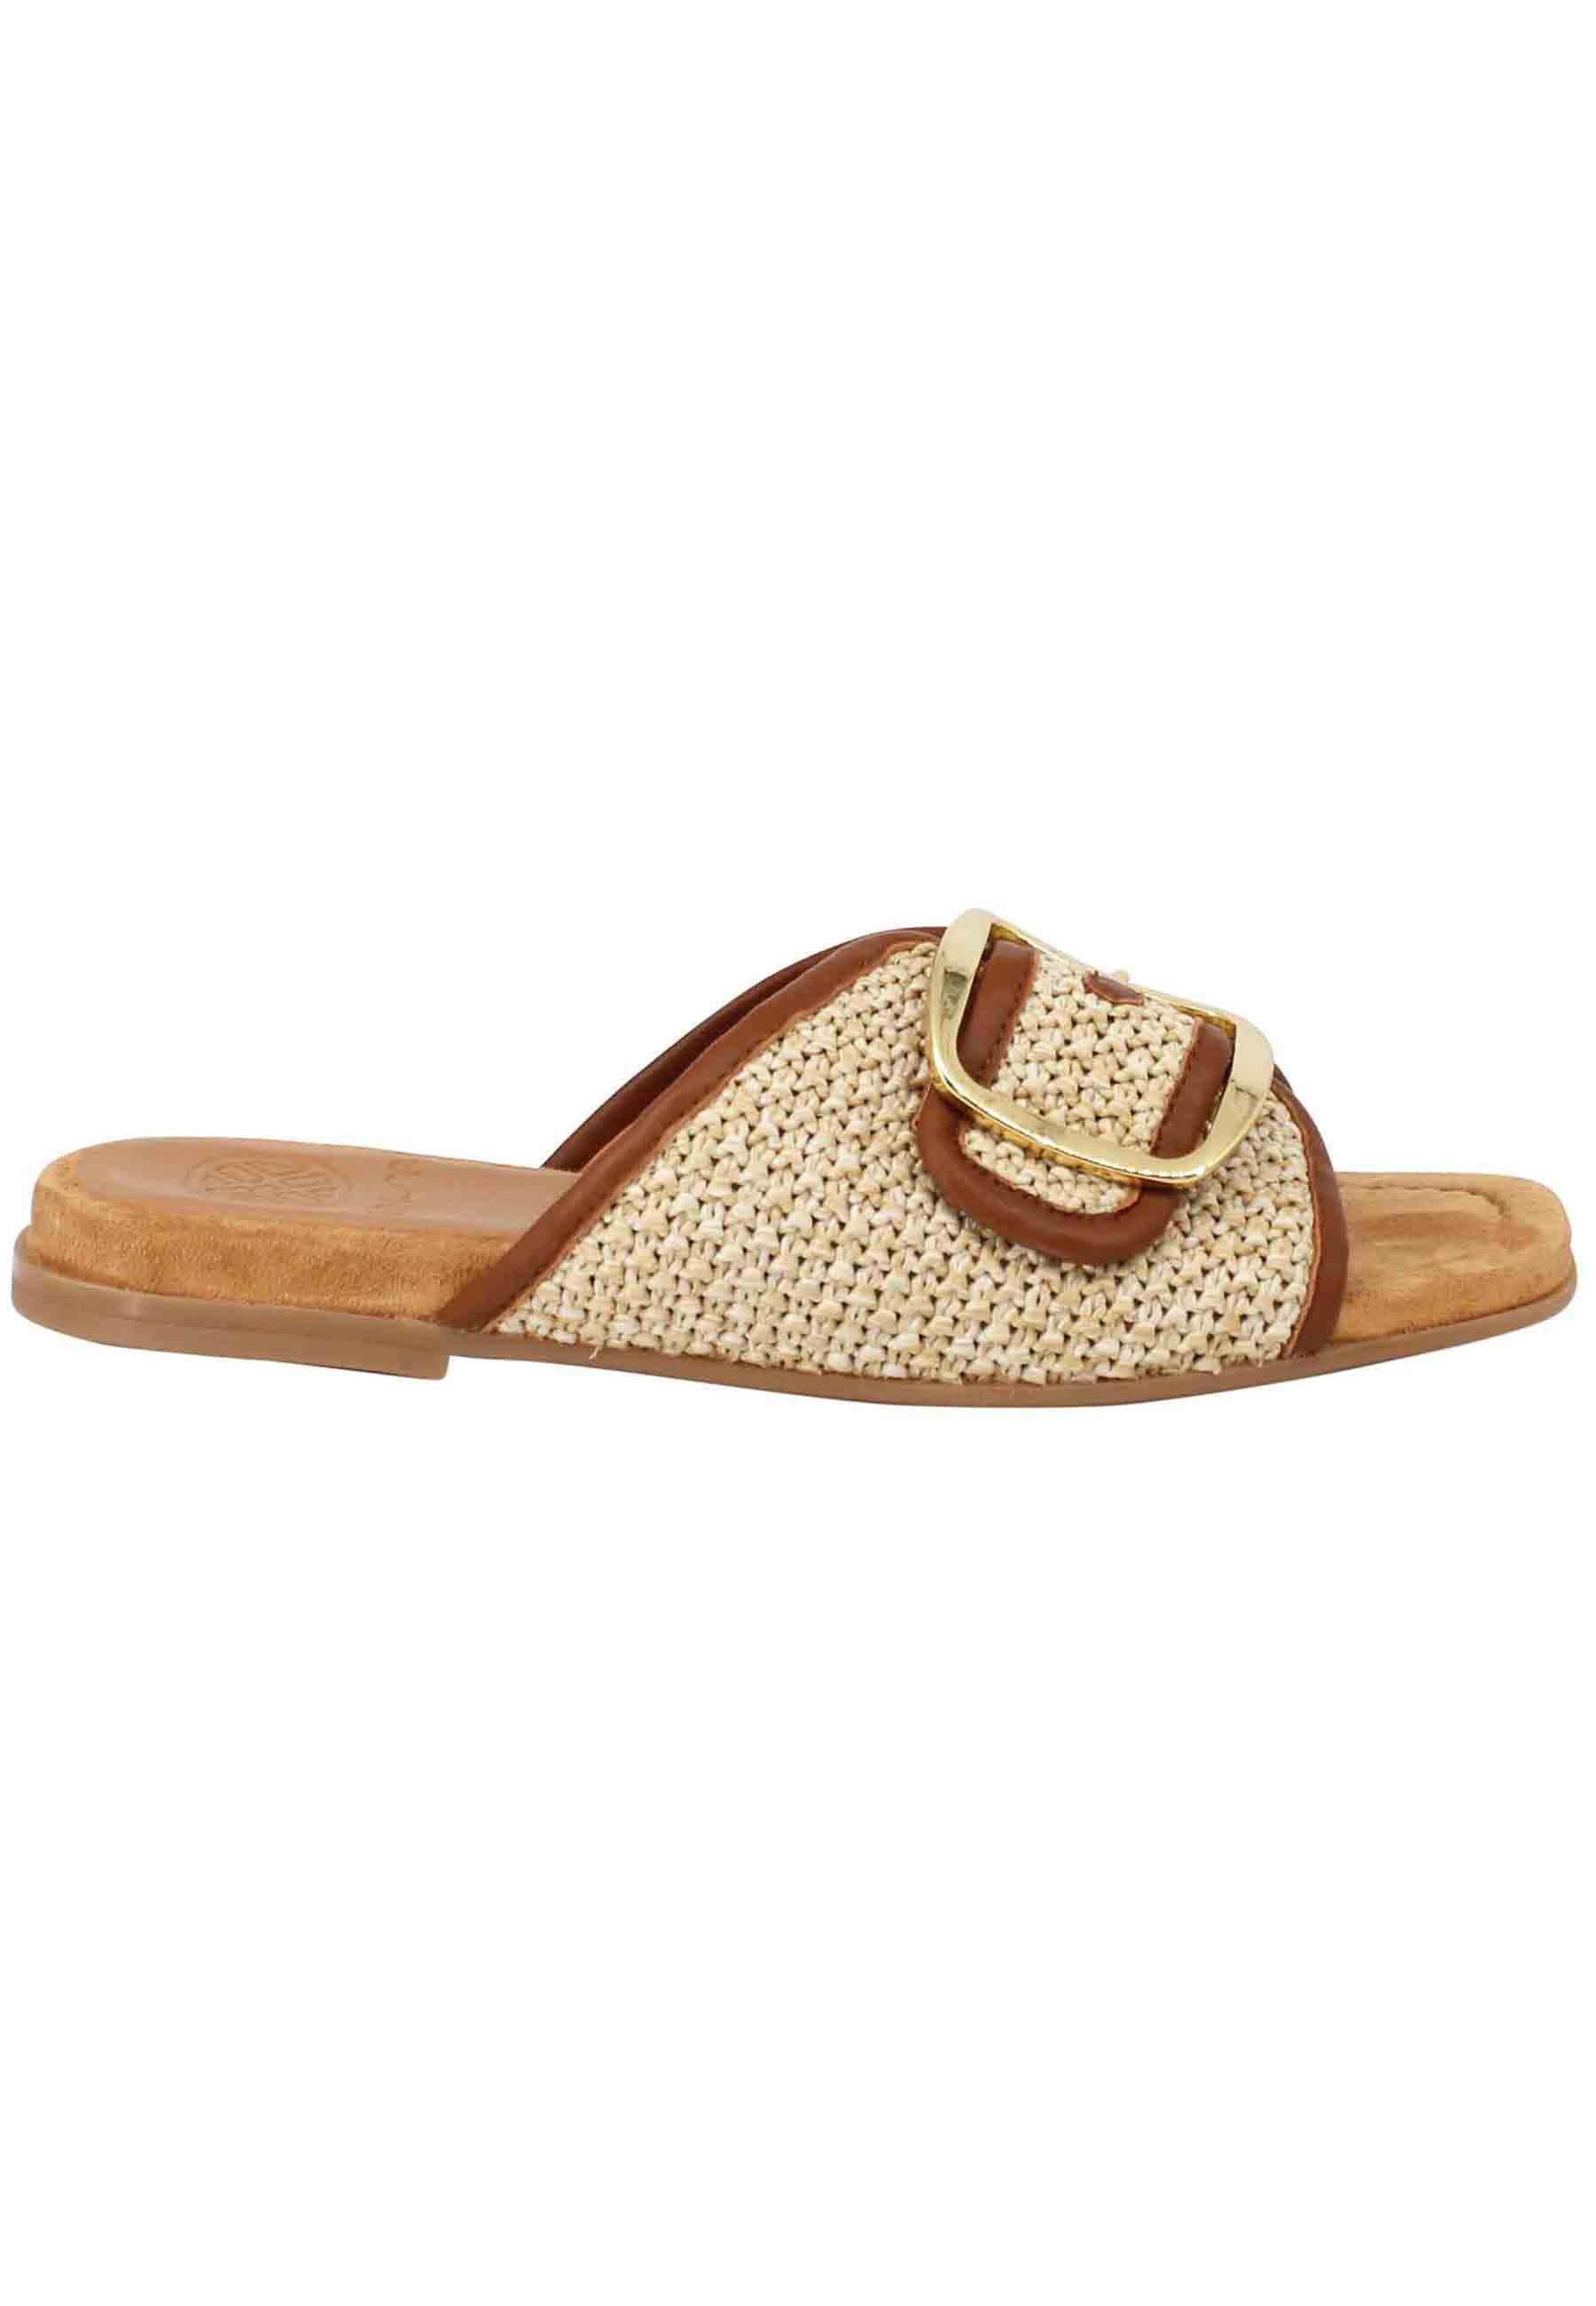 Women's flat sandals in natural fabric with gold buckle